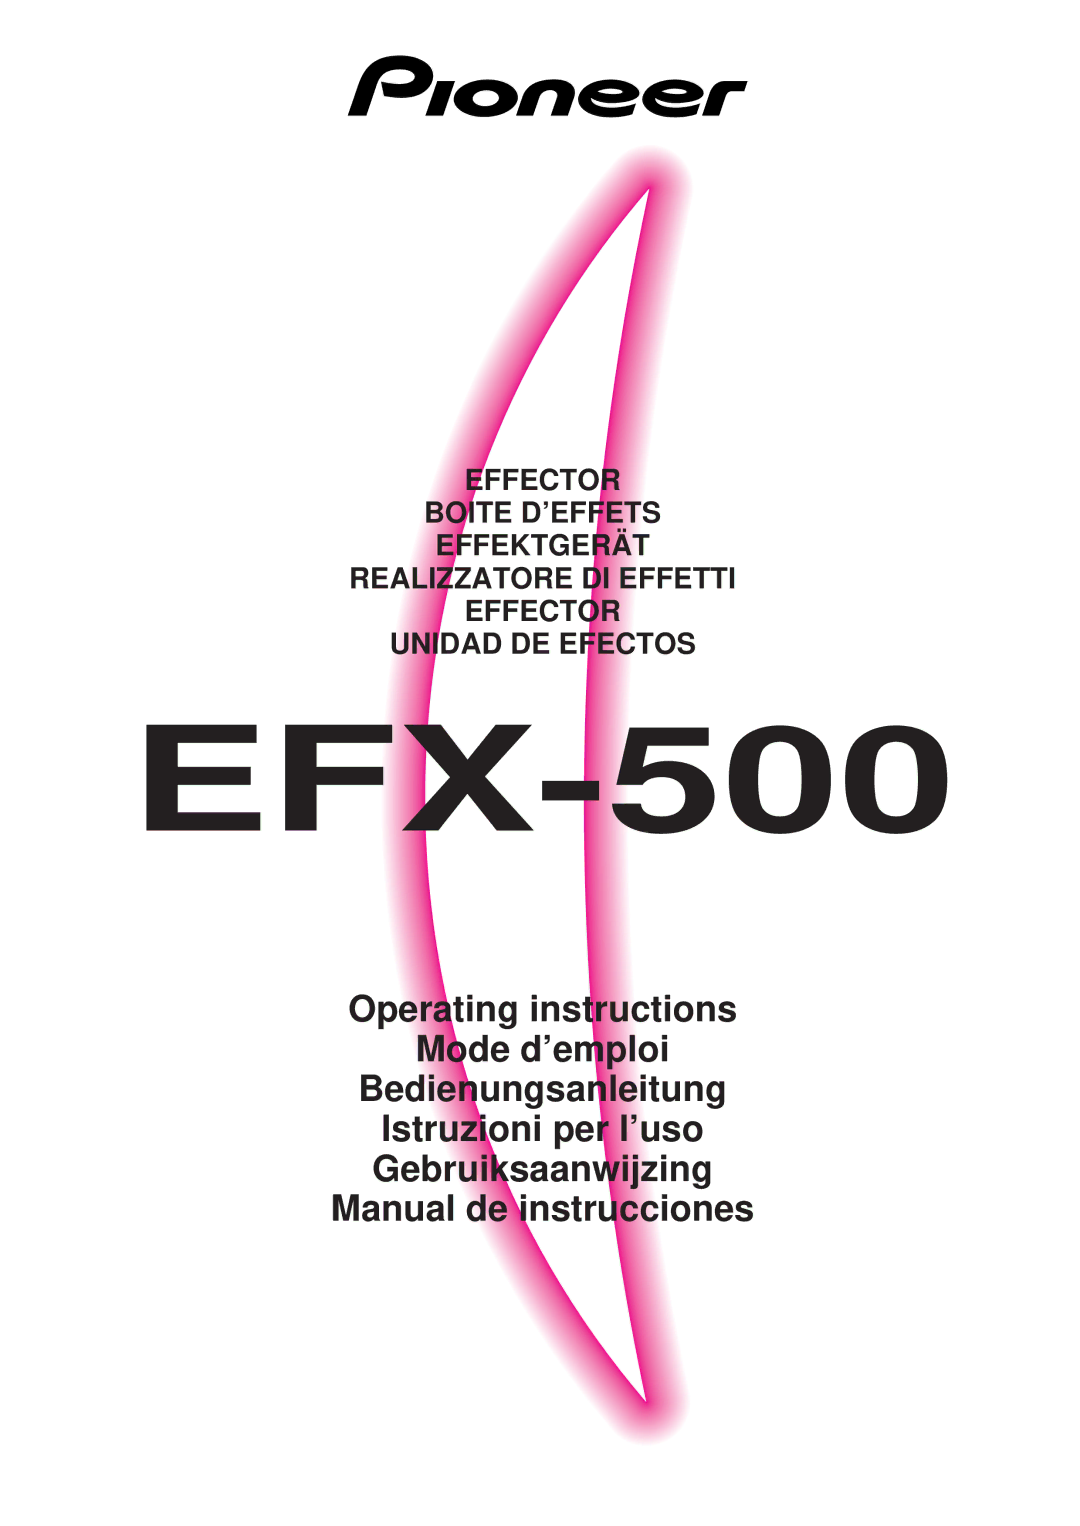 Pioneer Efx-500 operating instructions EFX-500 